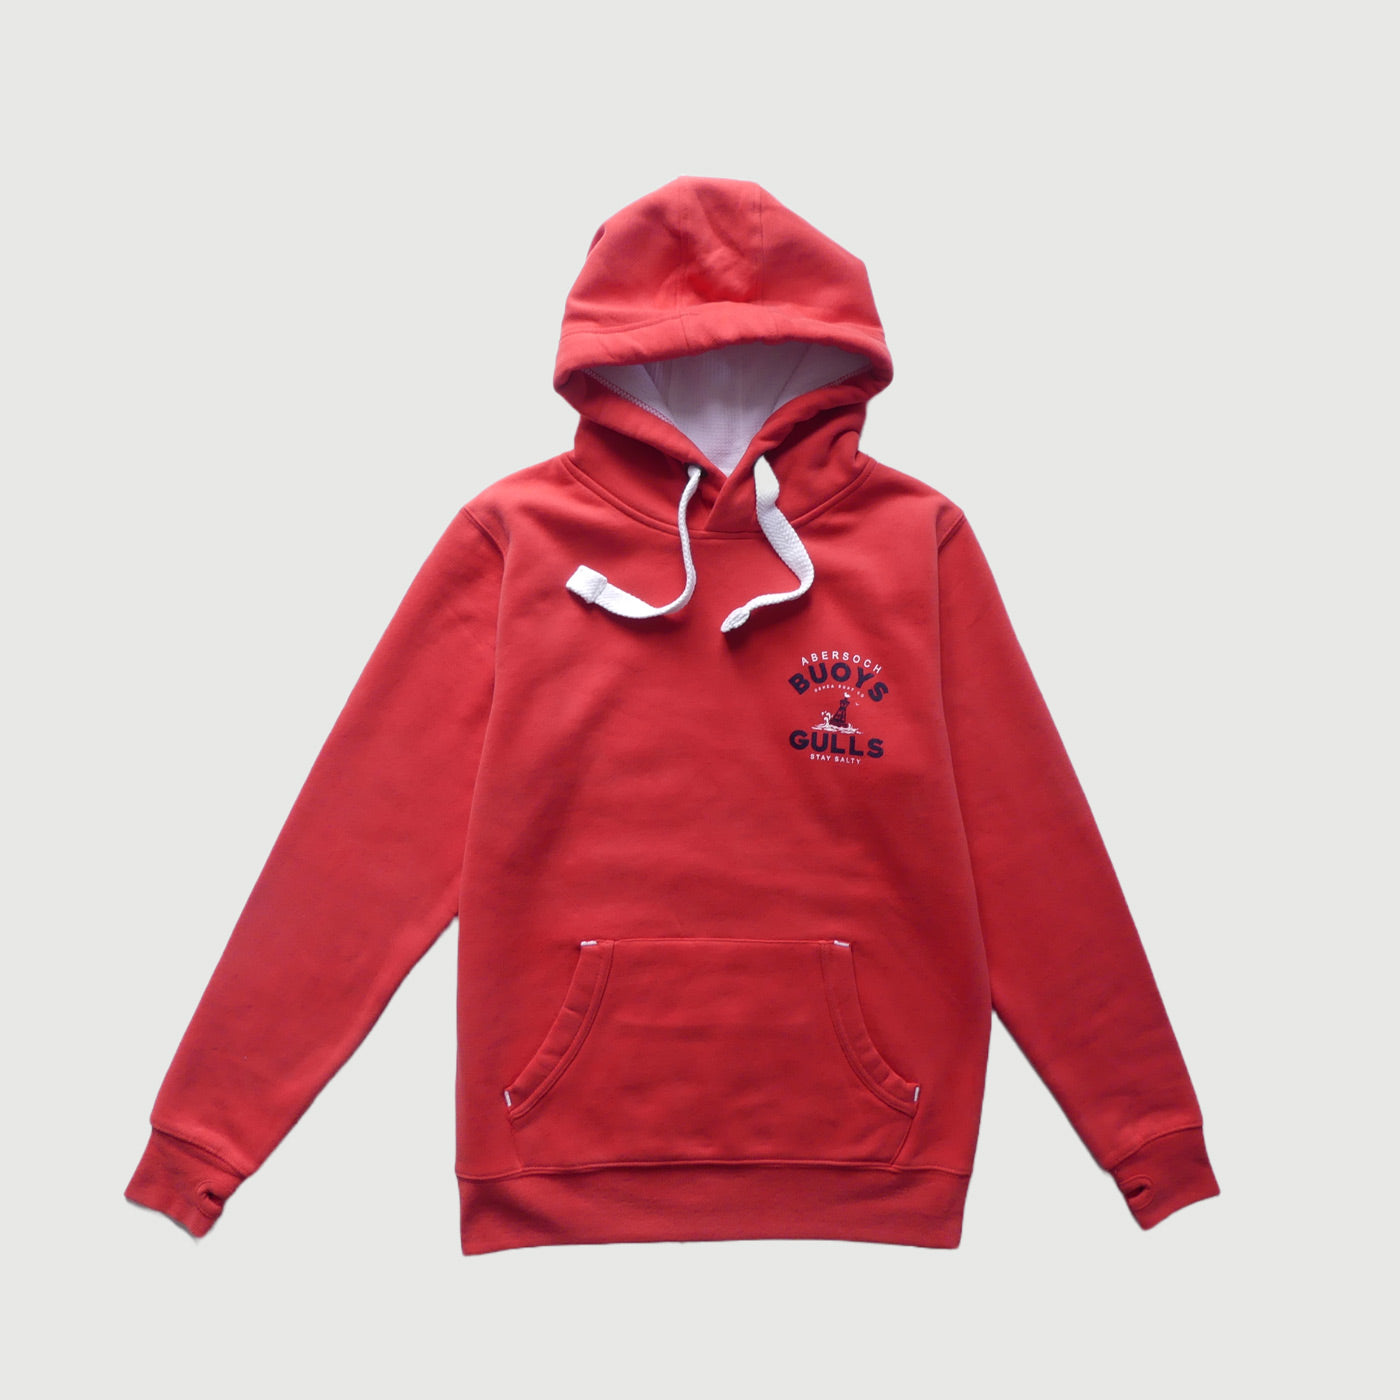 O'SHEA ABERSOCH "BUOYS AND GULLS" HOODIE - WASHED RED